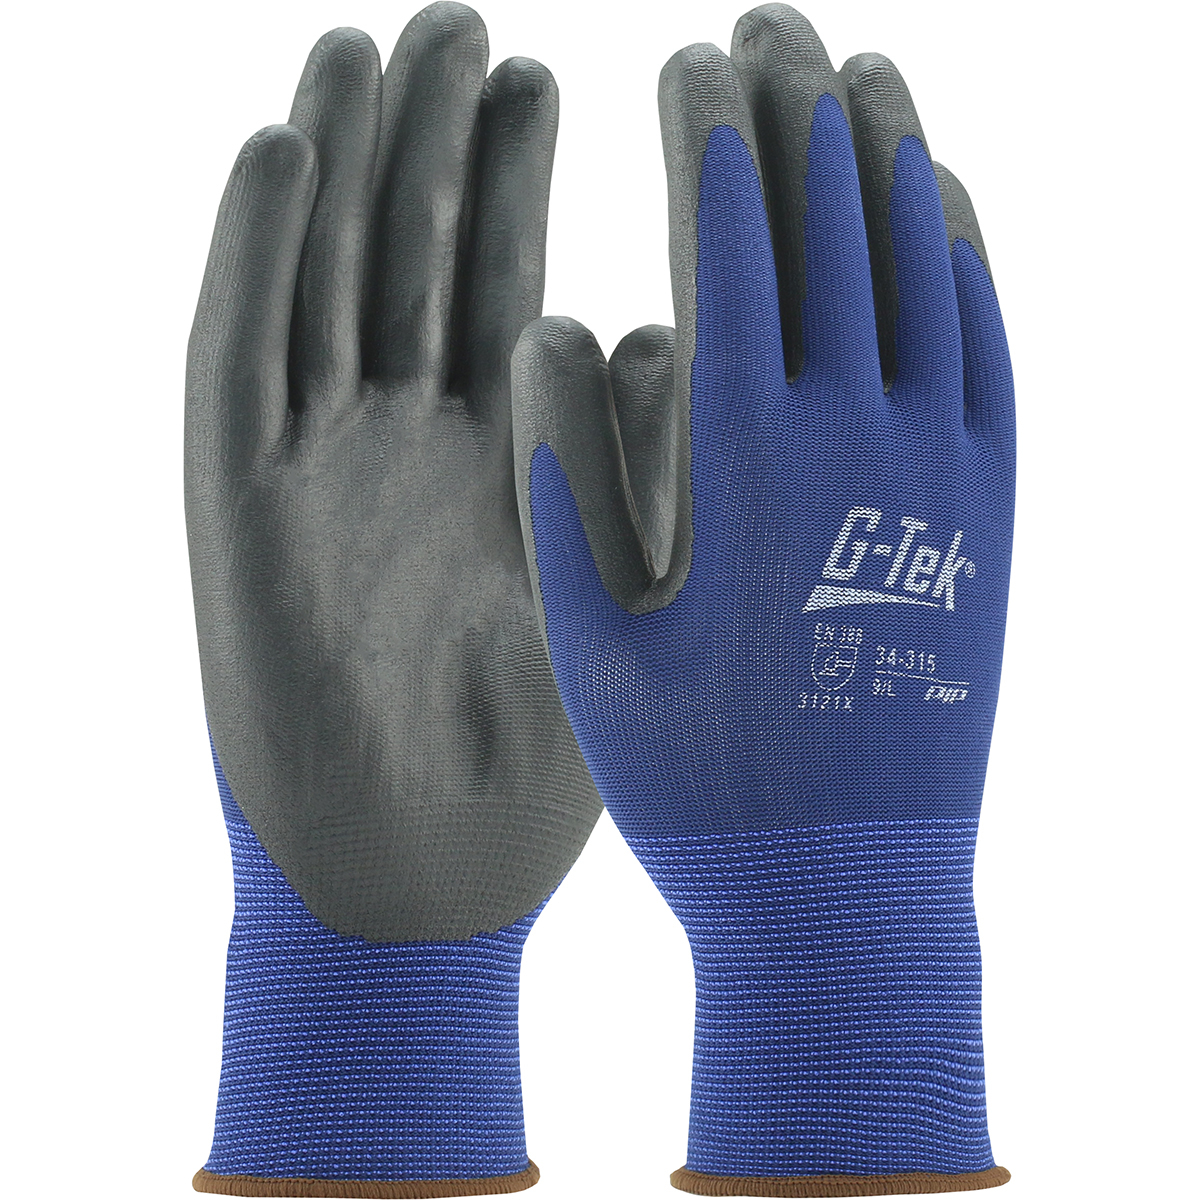 PIP® G-Tek® 34-315XL Seamless Knit Polyester Glove with Nitrile Coated Foam Grip on Palm & Fingers - 15 Gauge